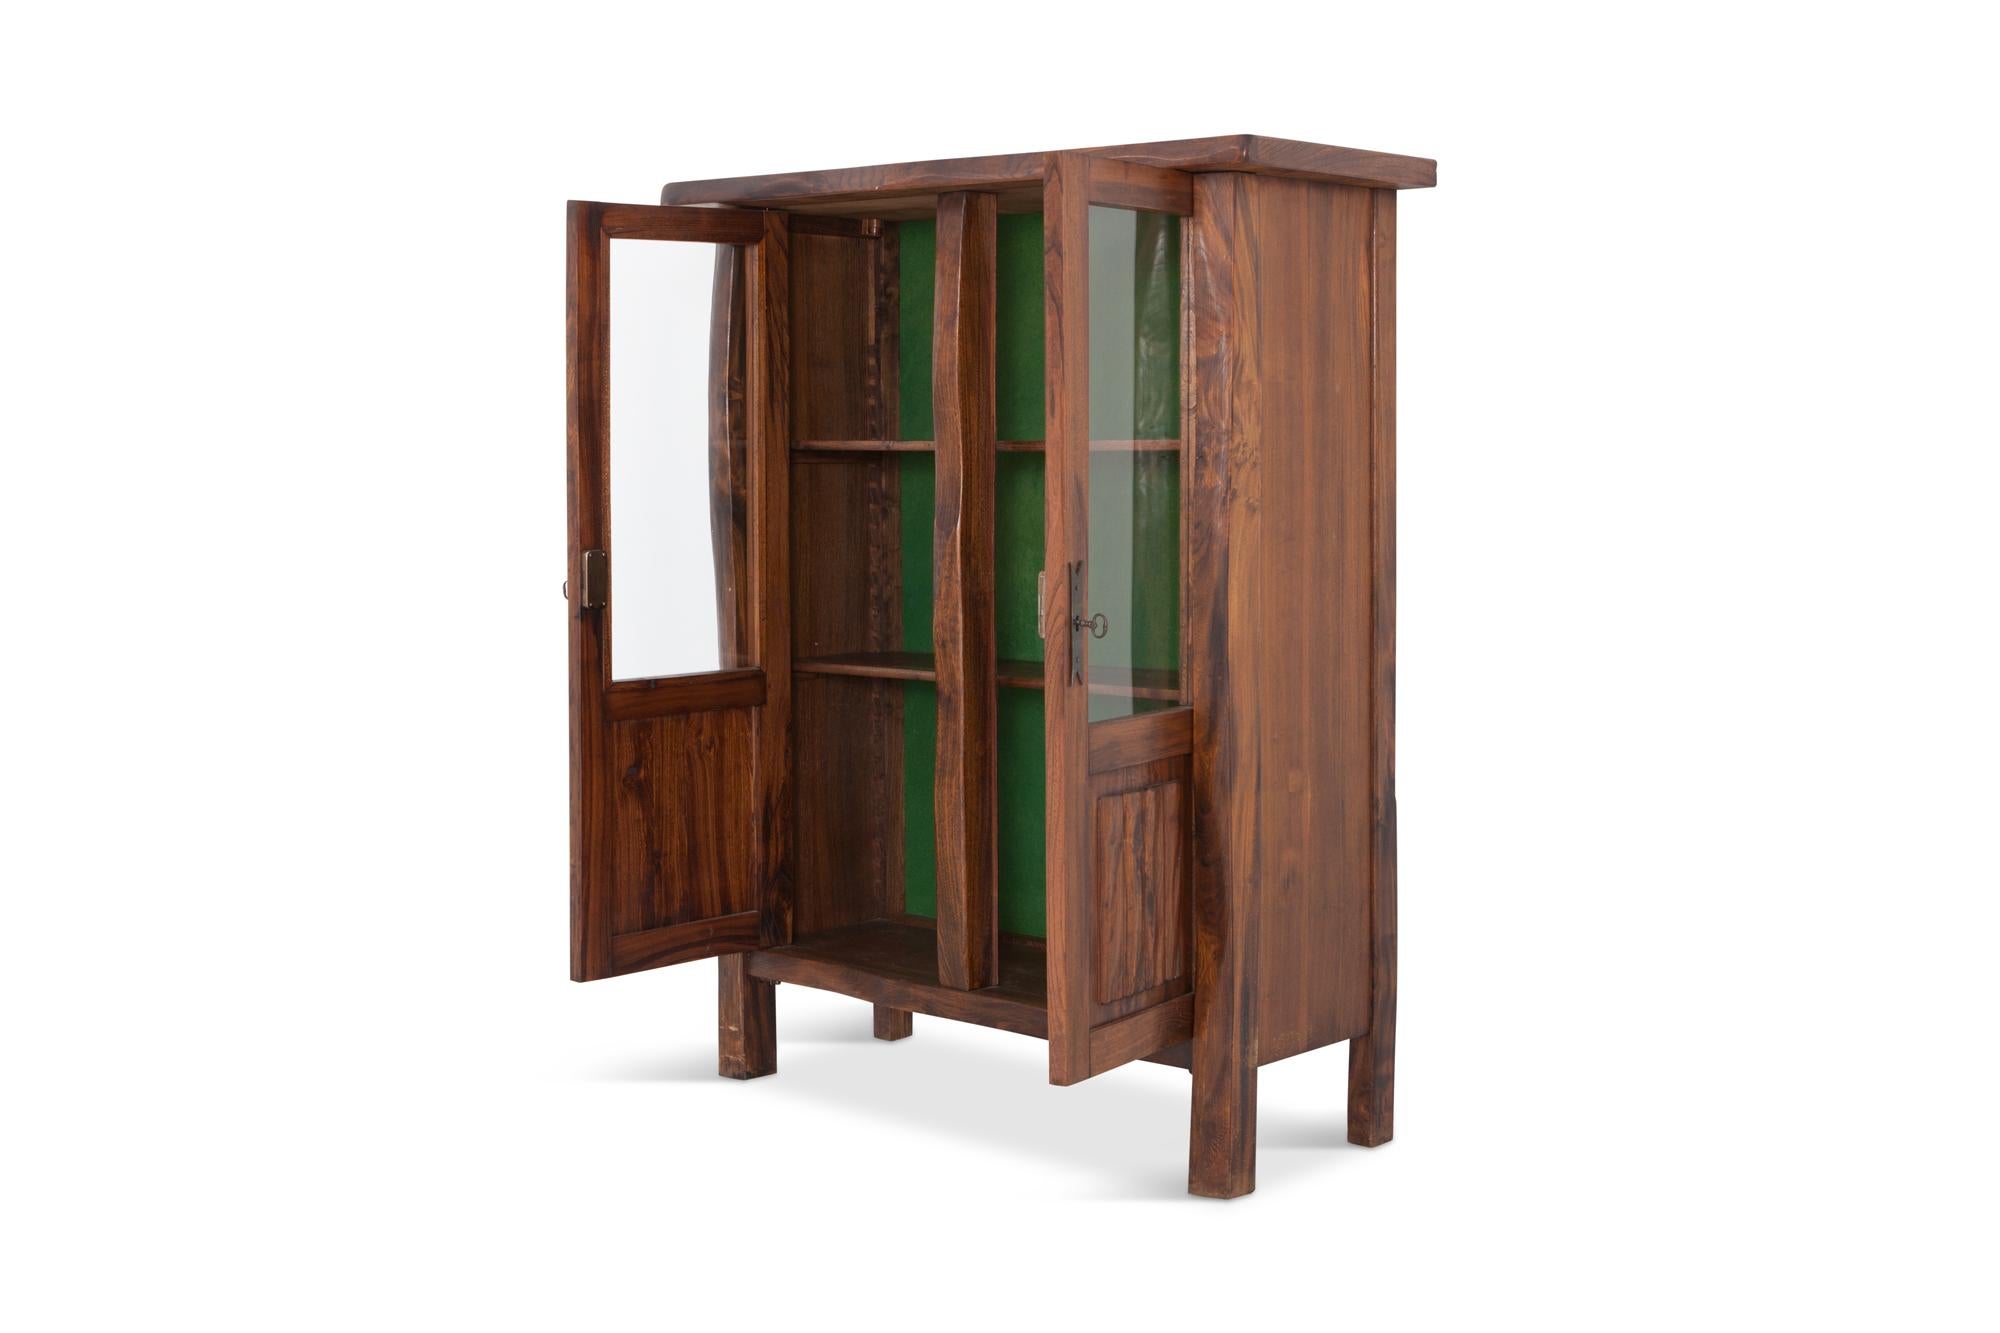 Rustic design highboard in solid elm 
The elm show a rich grain which gives this item tons of character. The two door panels are provided with glass window, therefore it can also be used as show case or dry bar. Both doors are finished with